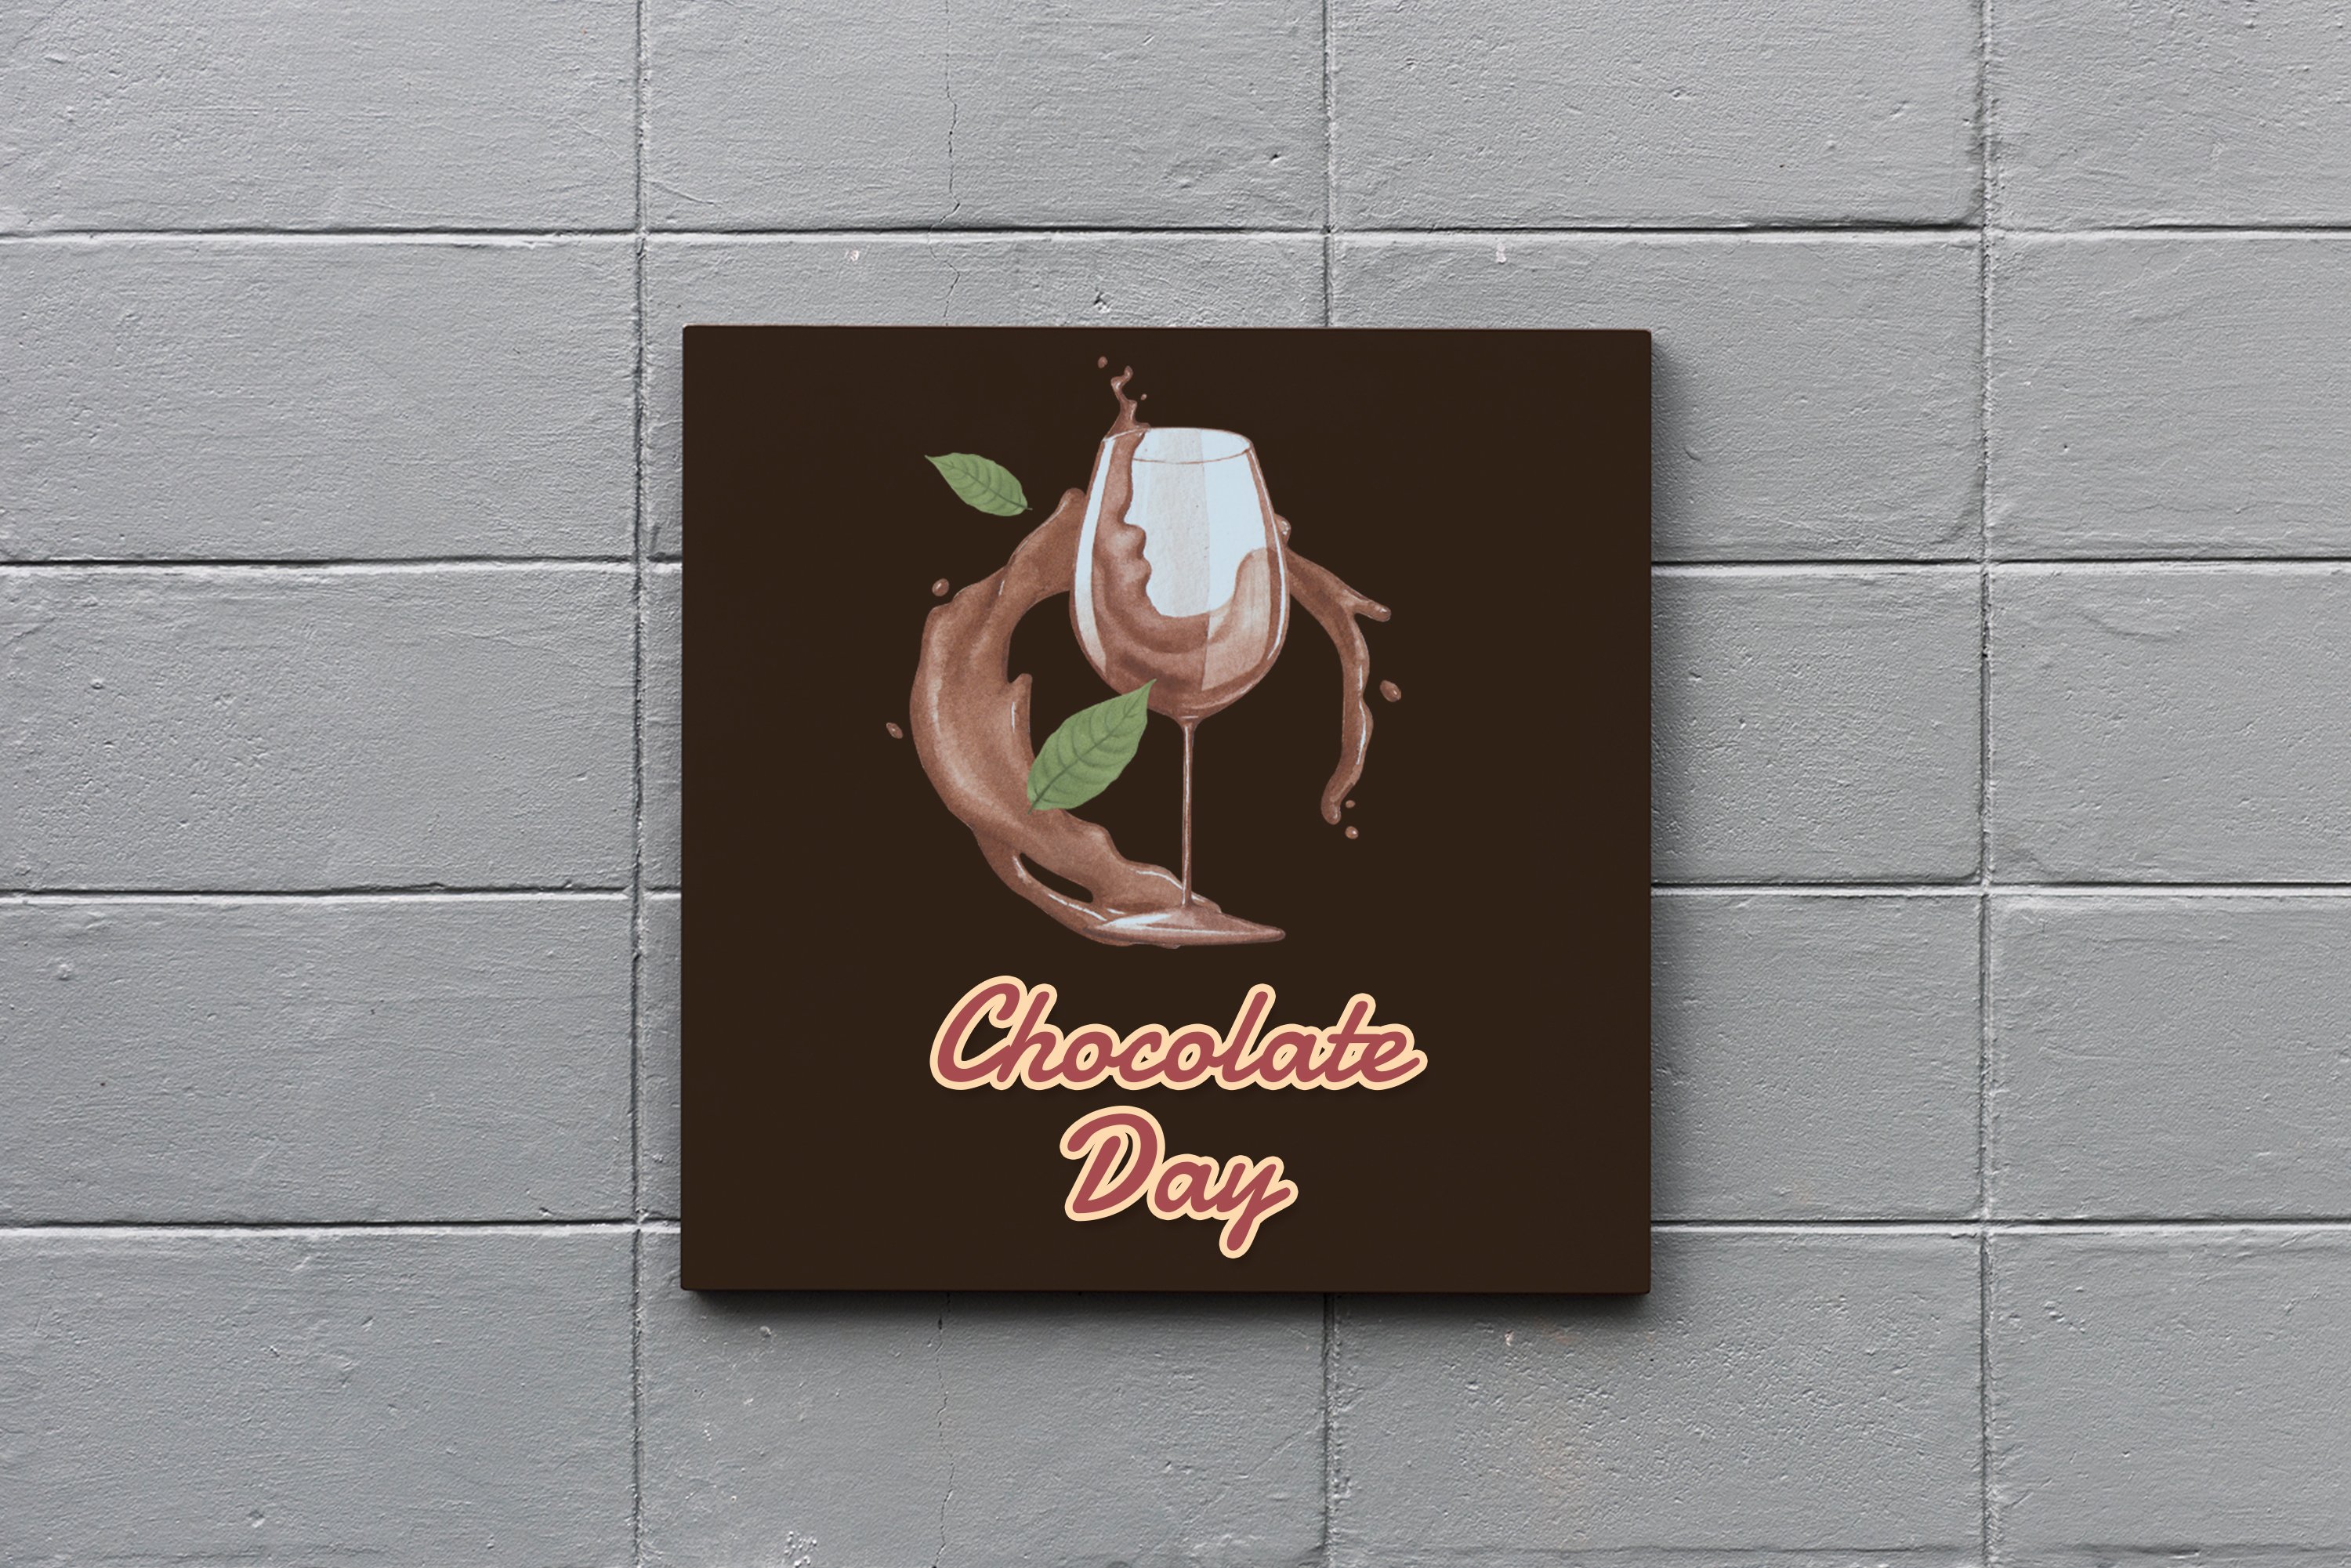 Cool chocolate poster for caffee.